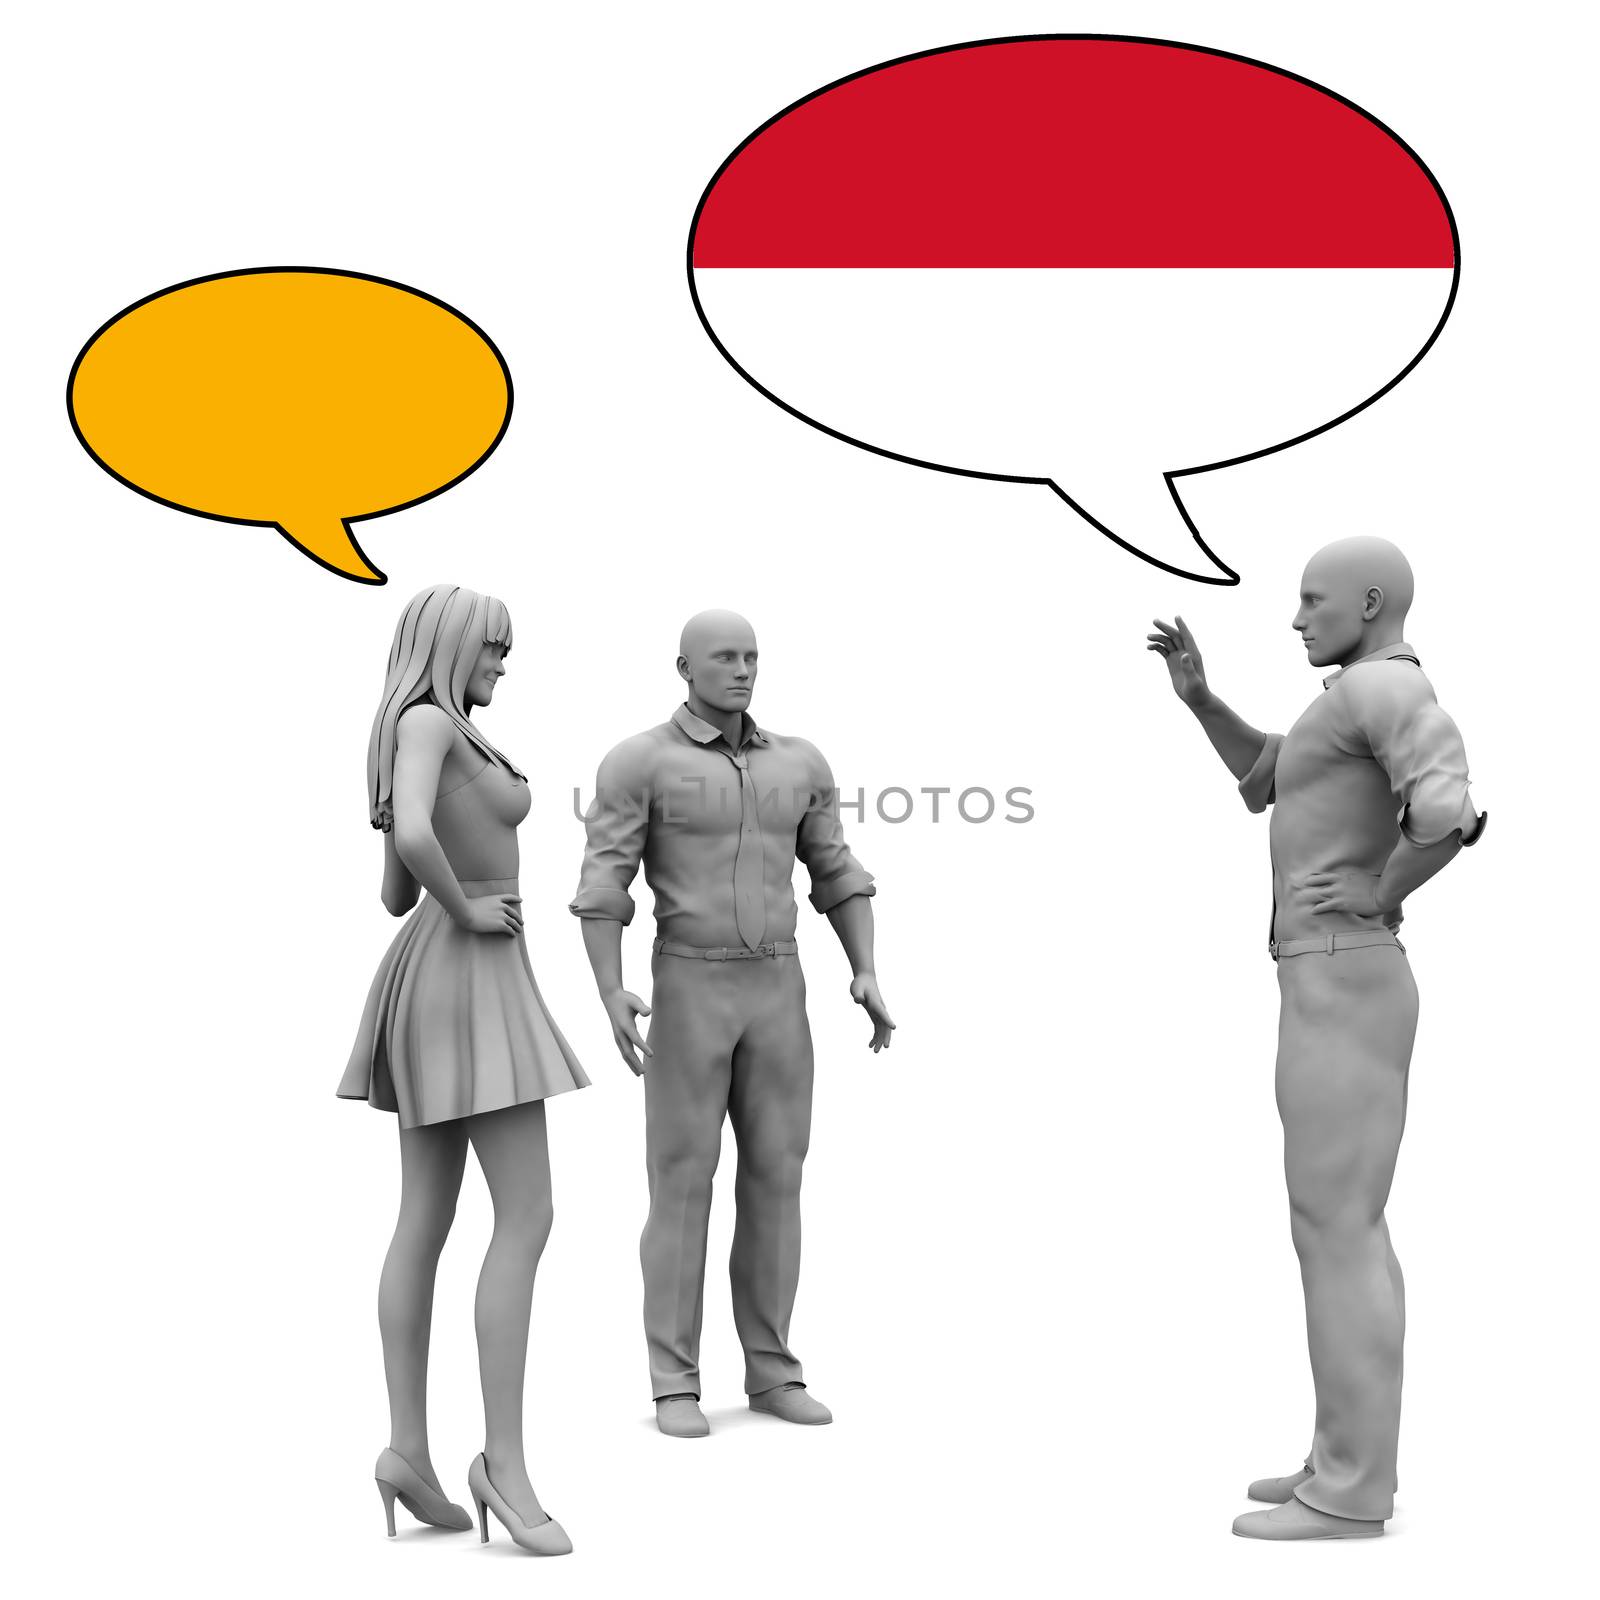 Learn Indonesian Culture and Language to Communicate